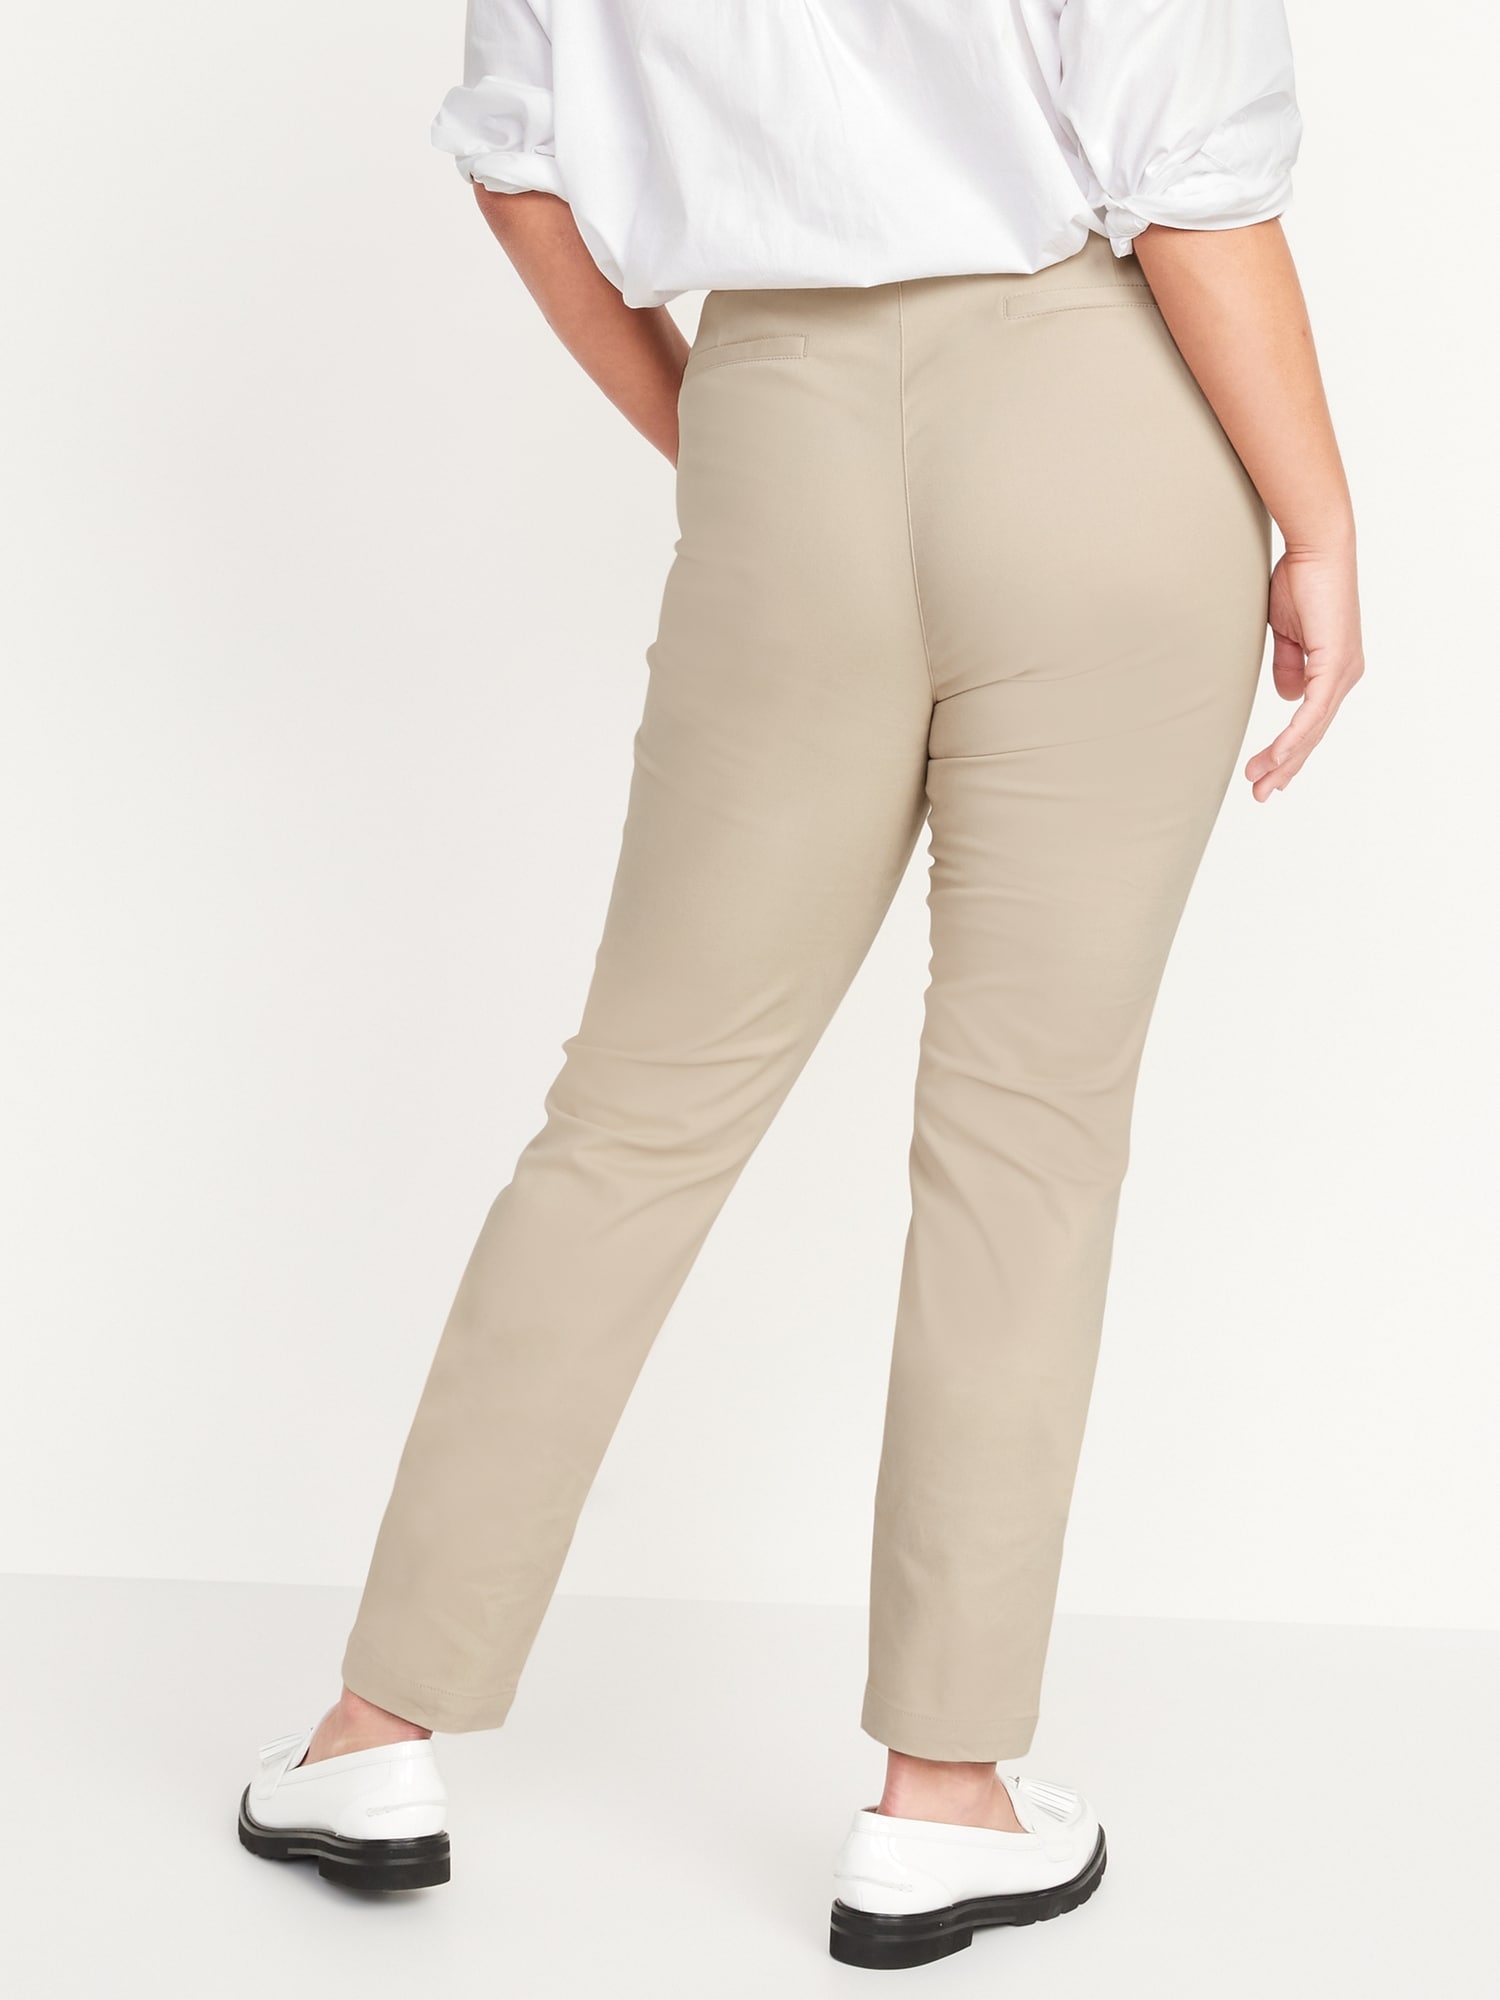 High-Waisted Wow Stretch Skinny Pants for Women | Old Navy